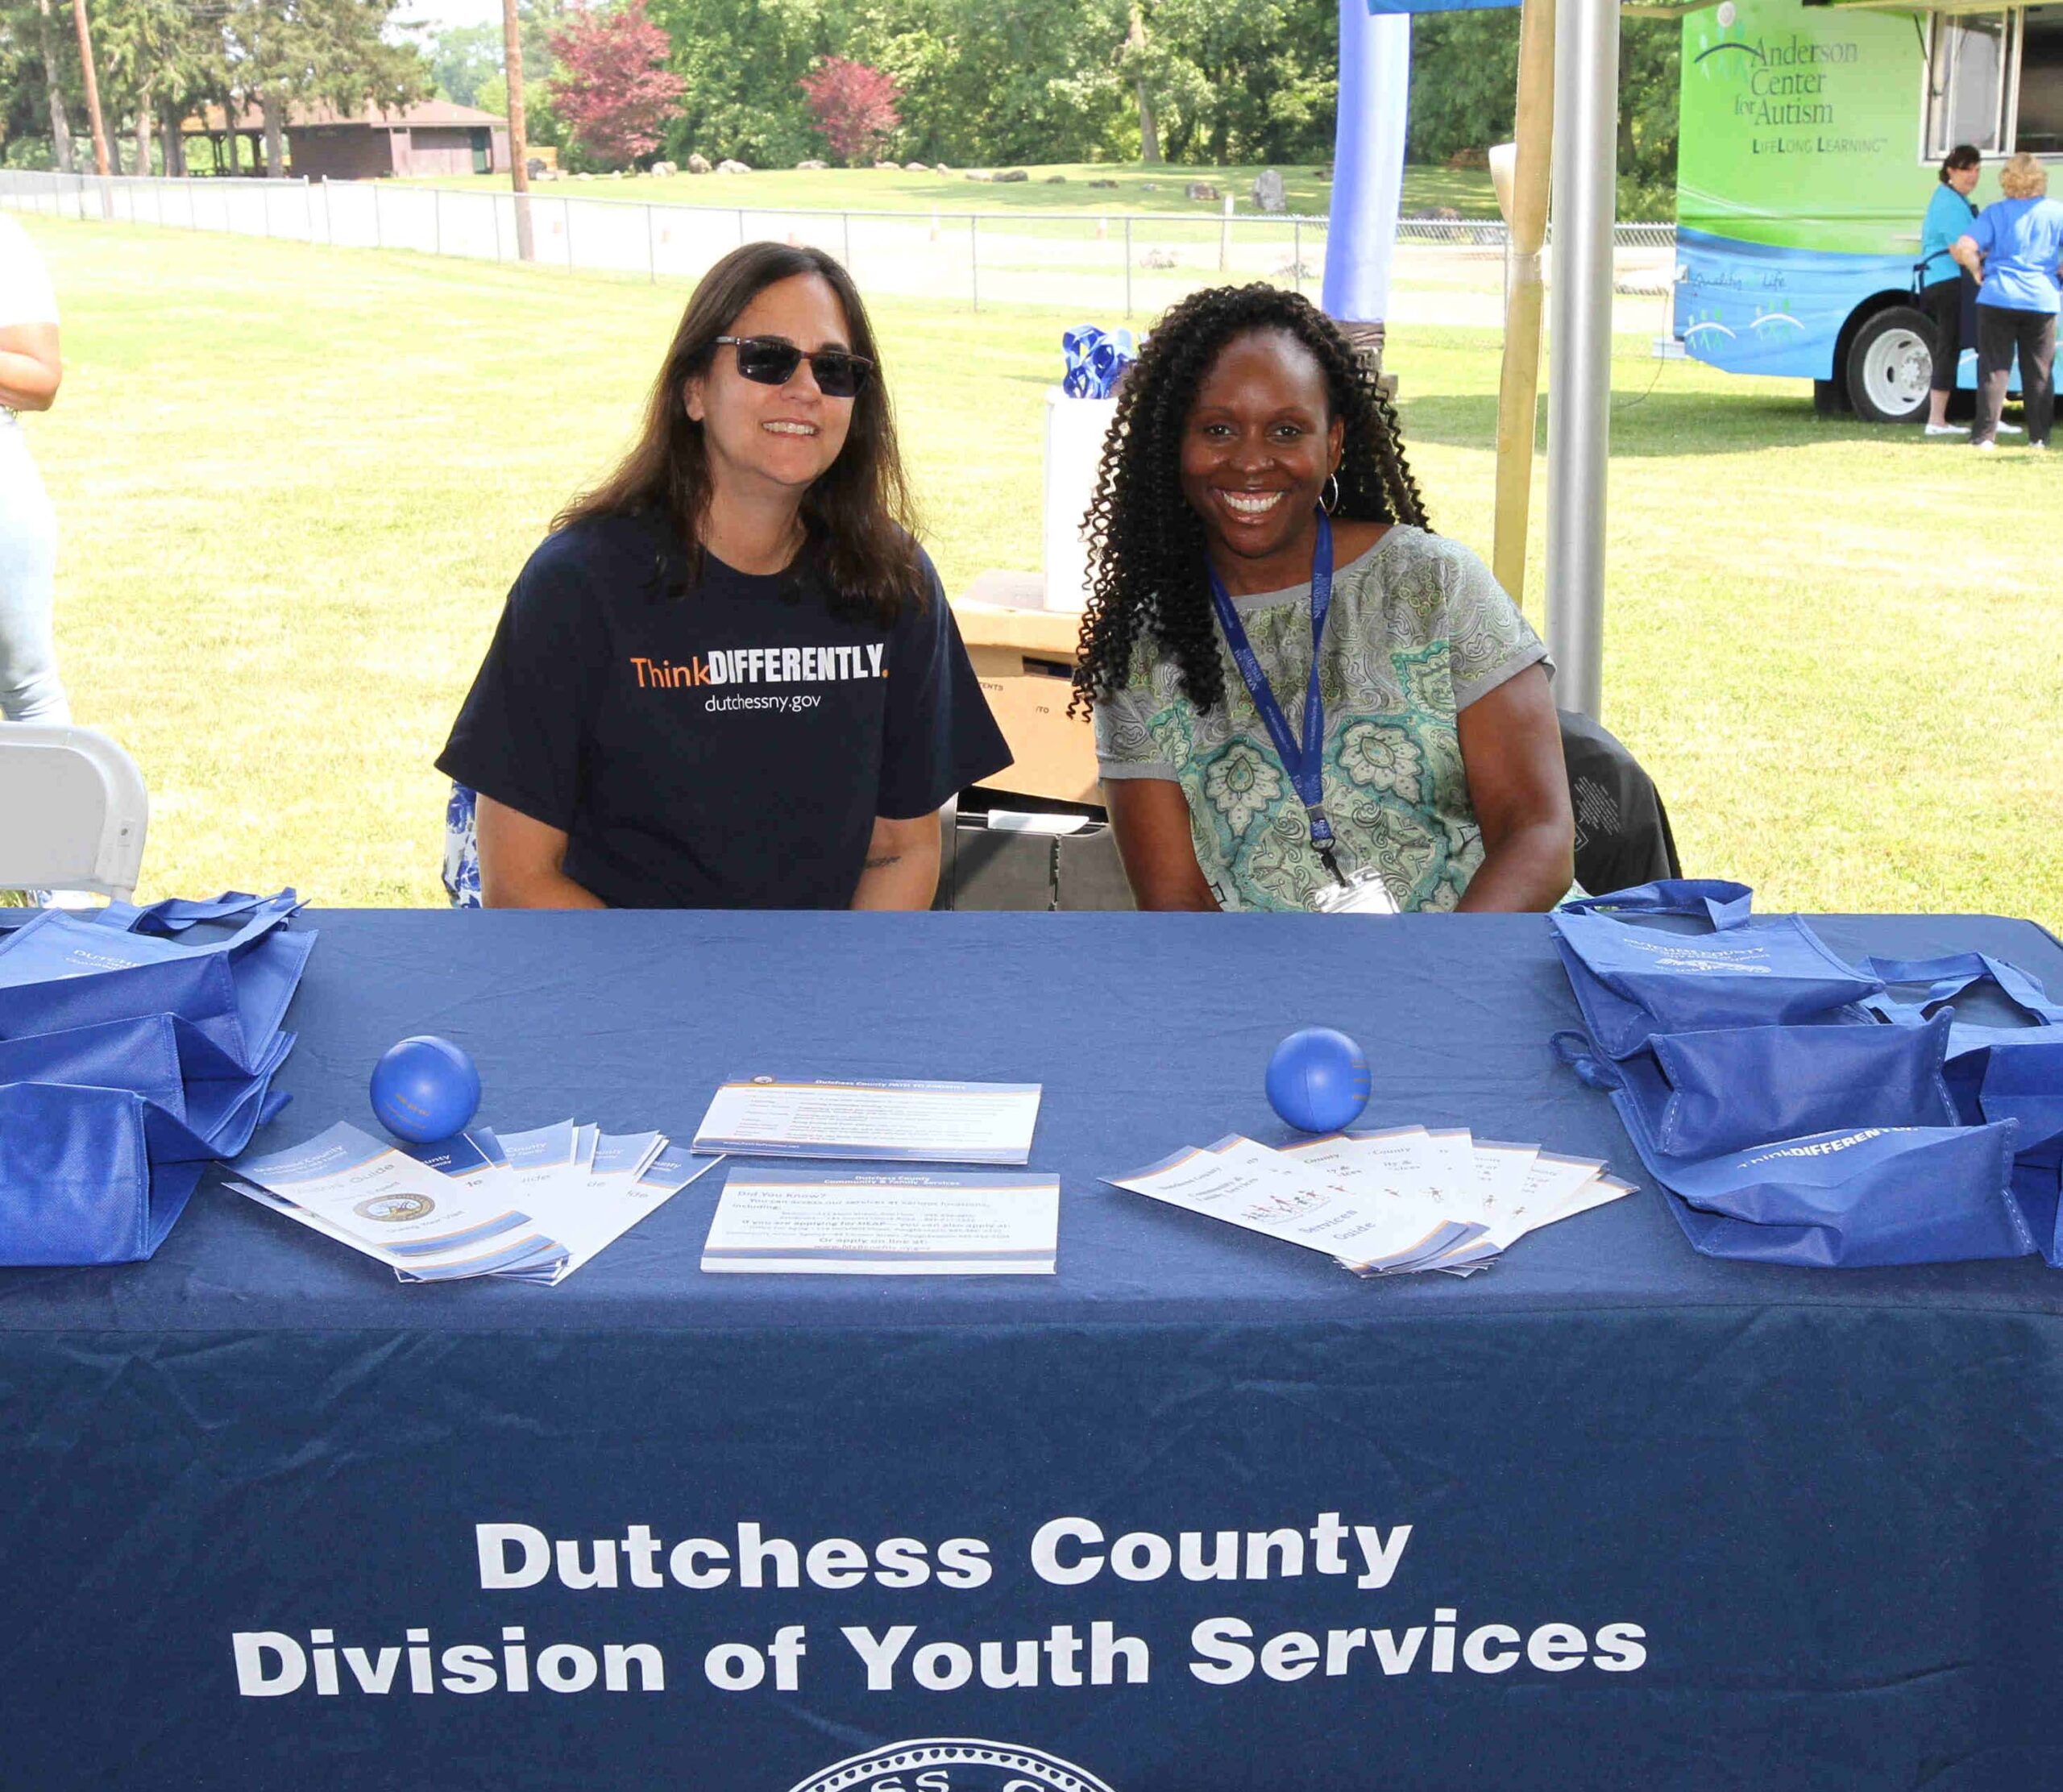 Approximately 40 different partner agencies, businesses and county departments joined us at the 3rd Annual ThinkDIFFERENTLY Fitness & Field Day on Friday June 29, 2023 at Bowdoin Park. Here Corrine and Karmen, from Dutchess County Division of Youth Services smile to the attendees while providing them with valuable information on resources and a fun blue stress ball.